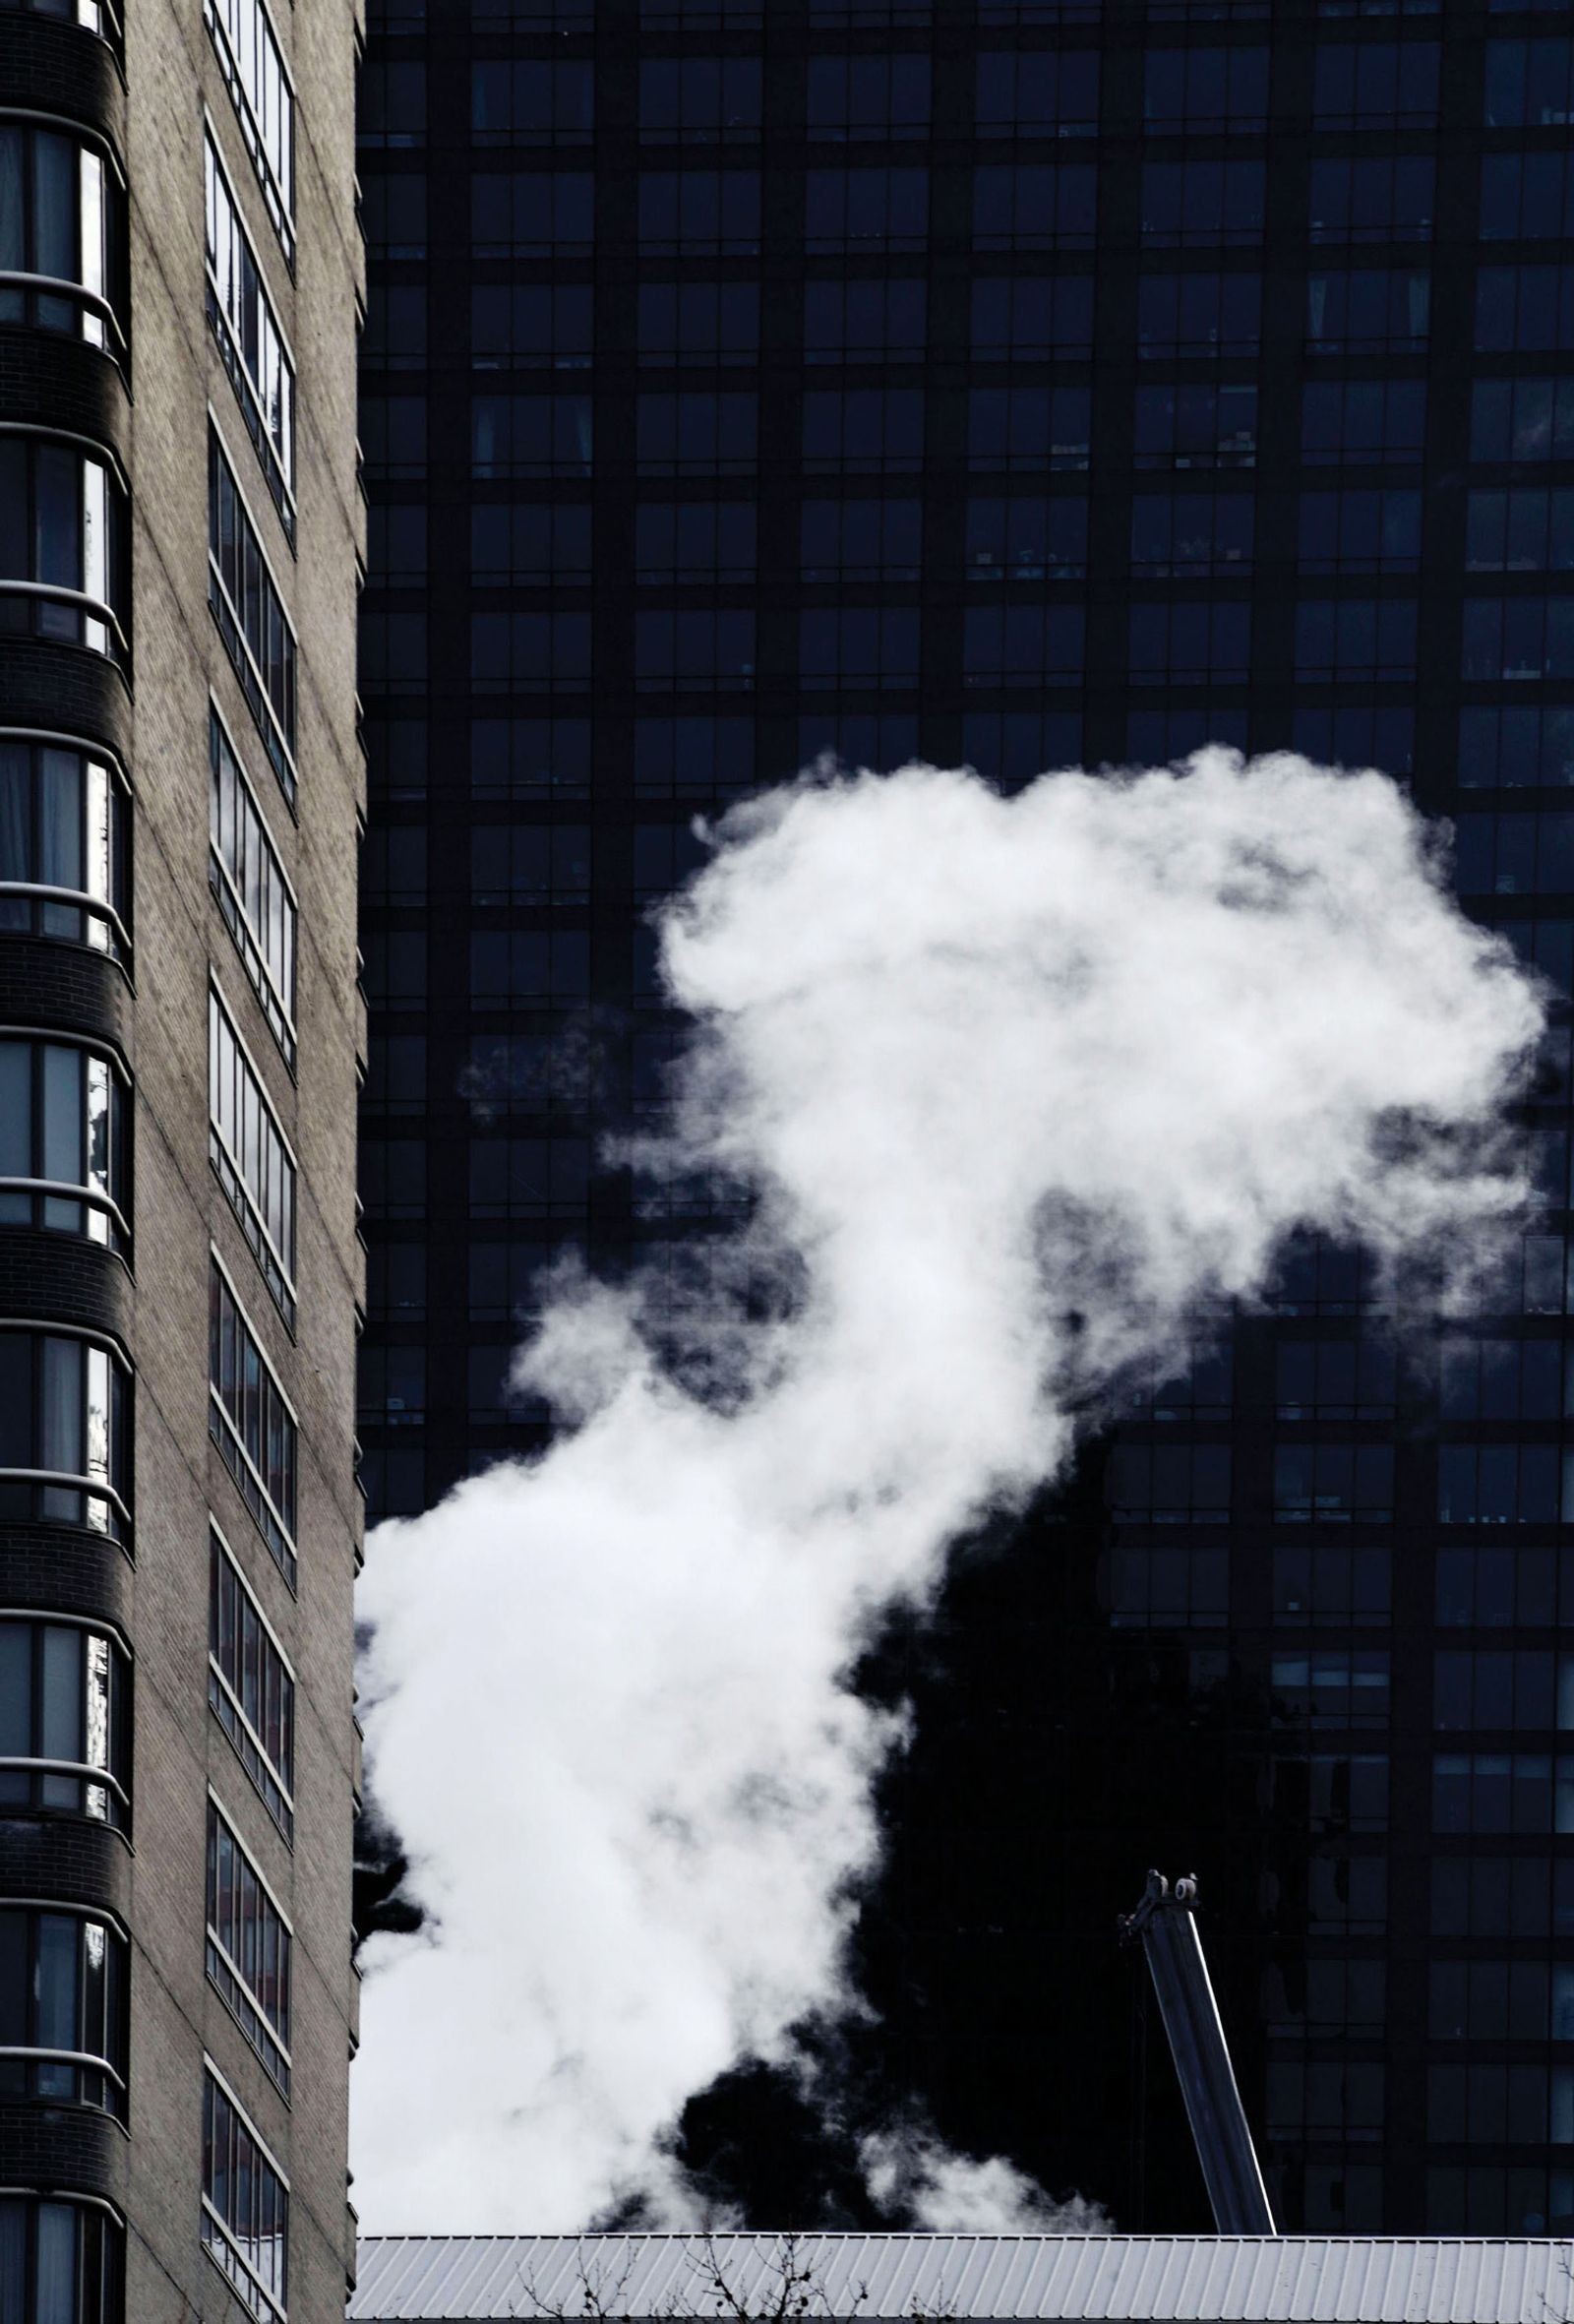 © Graeme Williams - New York, USA. 2016. A steam cloud rises from a block of flats in a densely populated district.